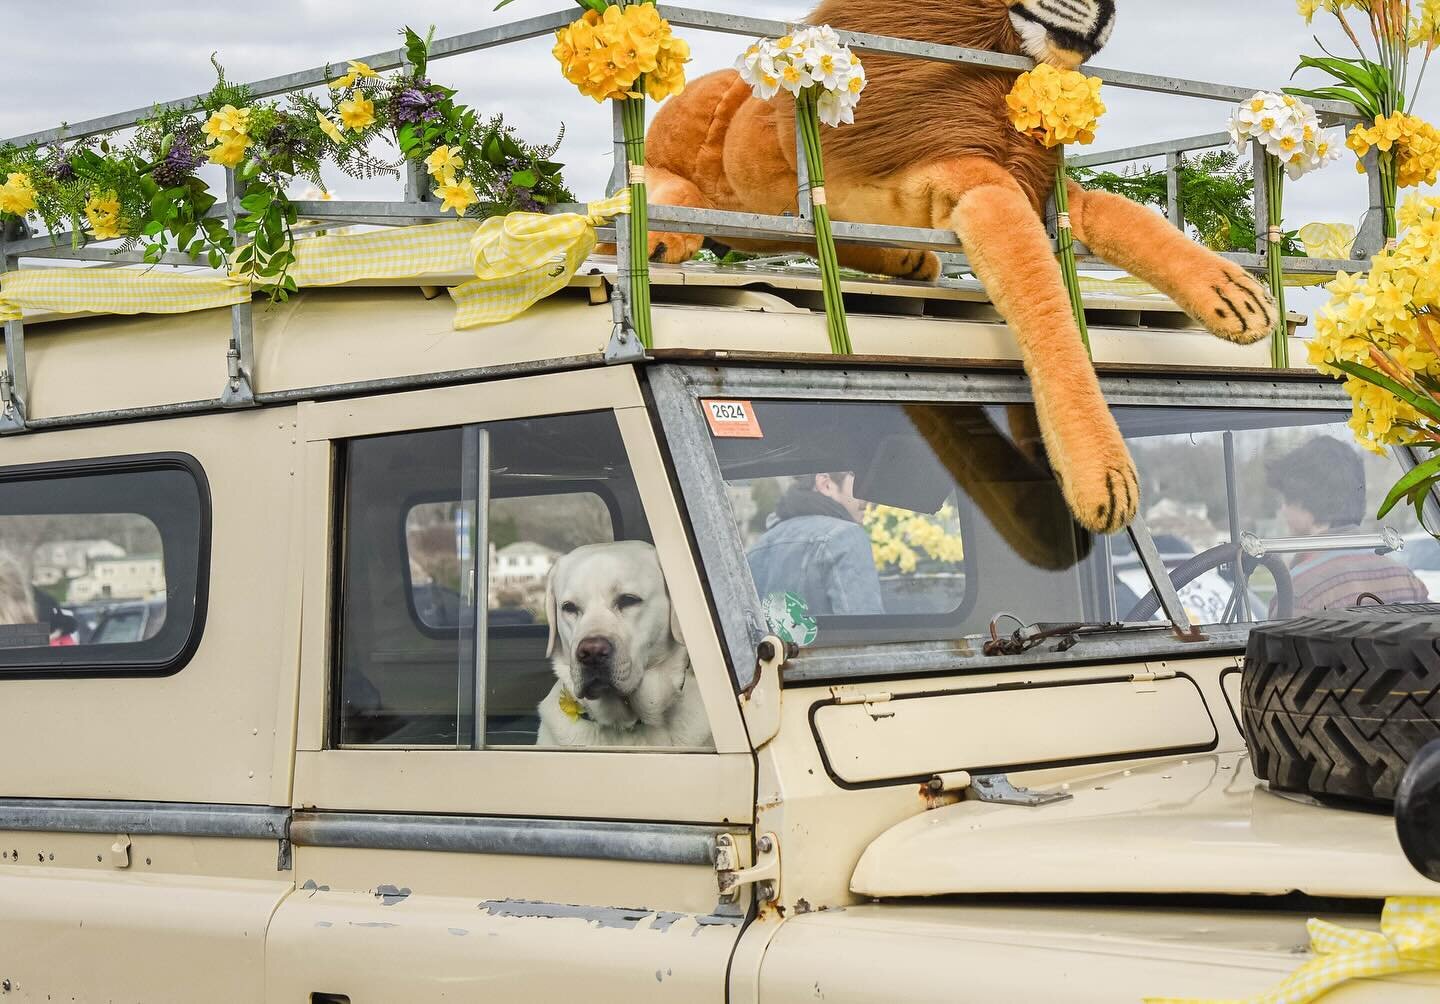 Who&rsquo;s ready to get daffy?! 🌼 We&rsquo;ll see you at the Annual Daffodil Parade on April 21st
&bull;
&bull;
&bull;
#pawdrain #dogs #puppy #dsffodils #spring #newportri #cars #audrain